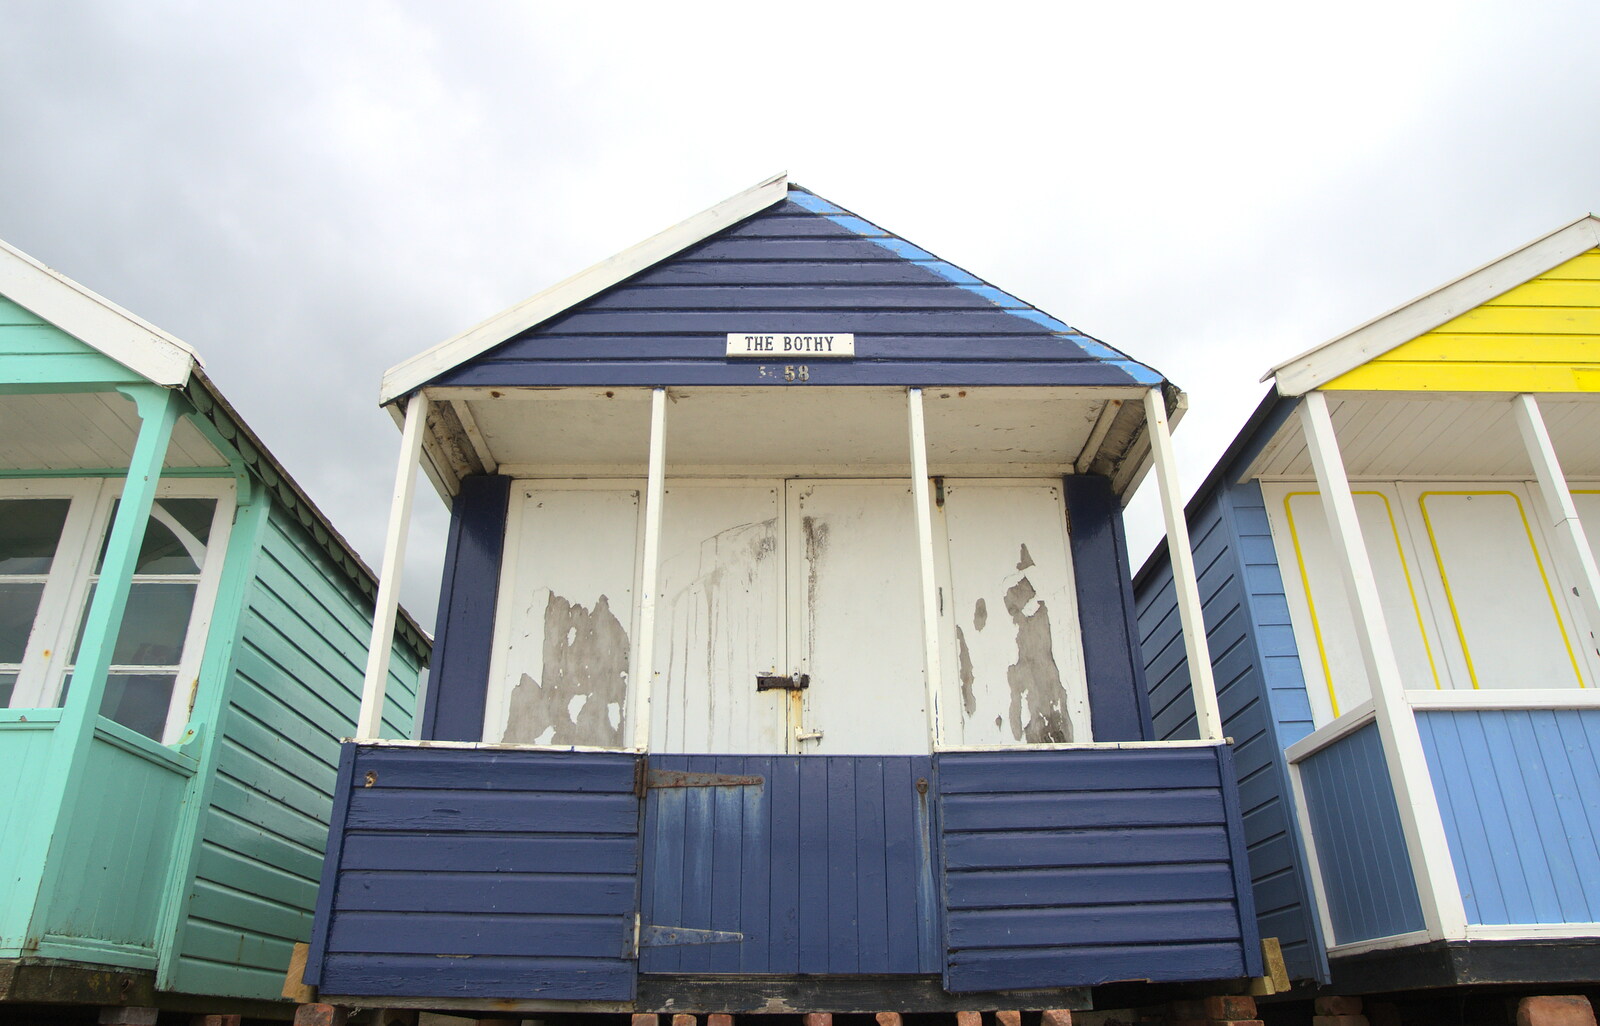 The famous beach huts from A Night at the Crown Hotel, Southwold, Suffolk - 13th June 2012